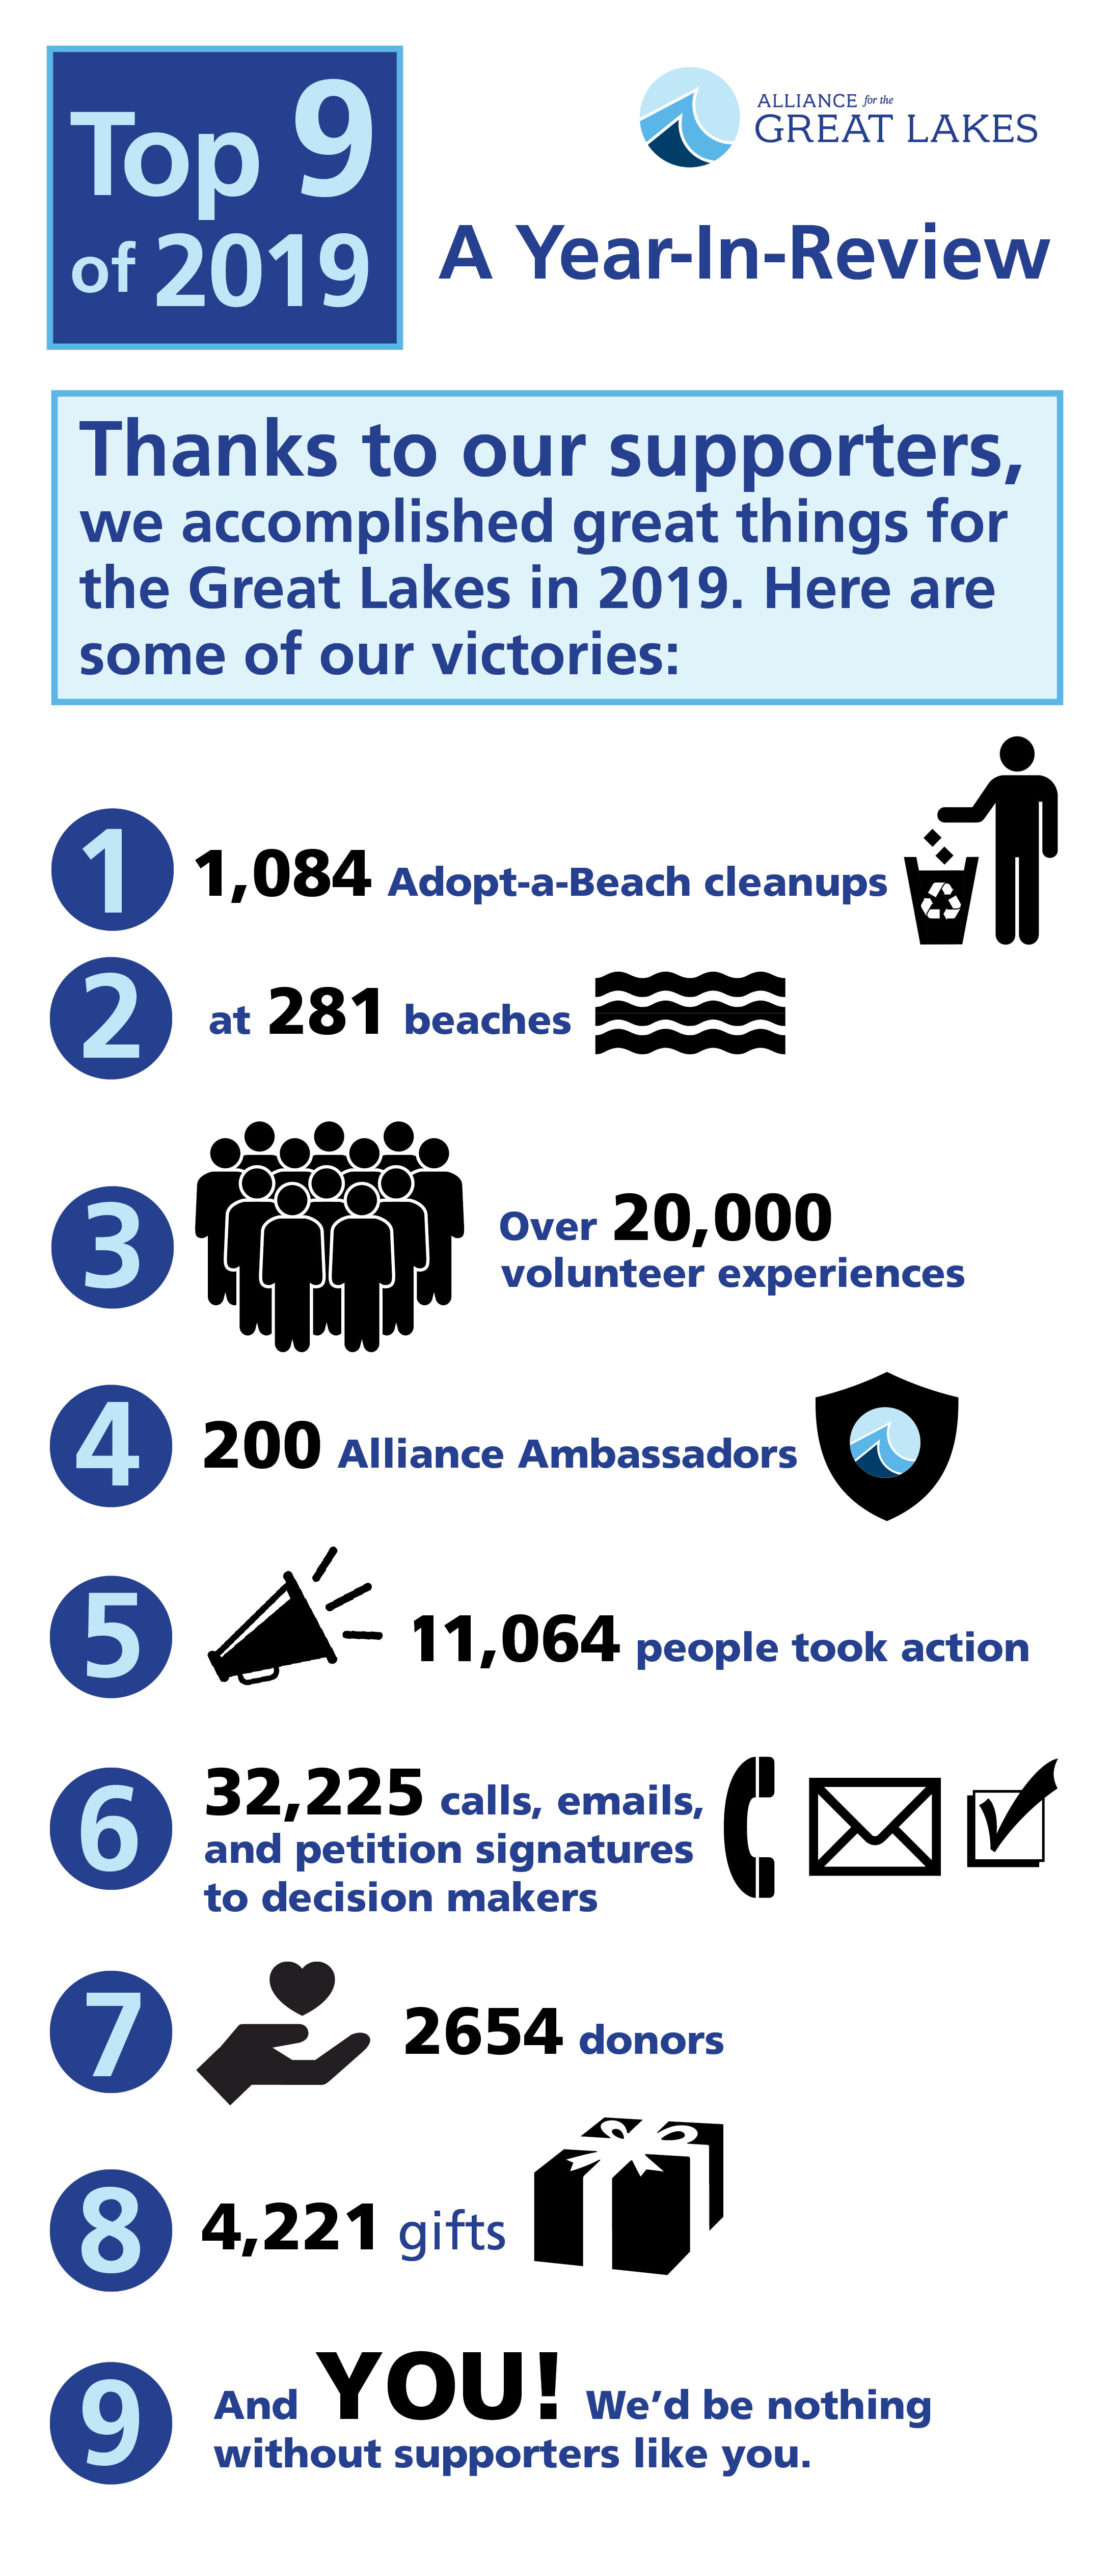 Thanks to our supporters, we accomplished great things for the Great Lakes in 2019. 1084 cleanups at 281 beaches. Over 20,000 volunteer experiences. 200 ambassadors. 11064 people took action with 32,225 calls, emails,, and petition signatures to decision makers. 2654 donors and 4221 gifts. But most importantly YOU. We'd be nothing without supporters like you. 